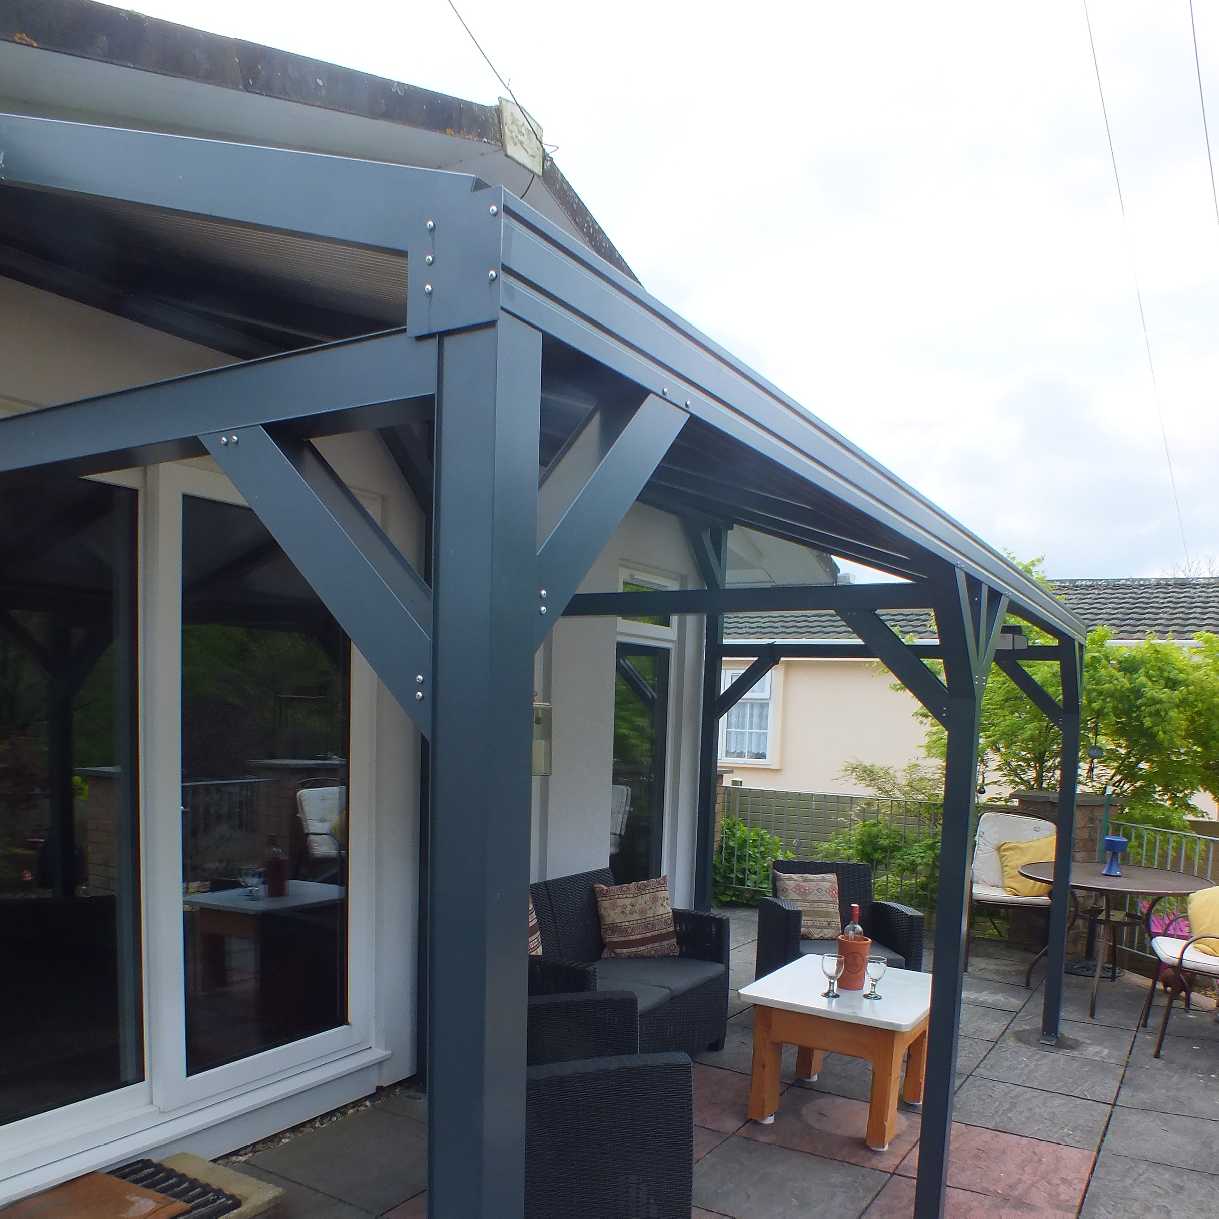 Affordable Omega Smart Free-Standing, Anthracite Grey MonoPitch Roof Canopy with 16mm Polycarbonate Glazing - 4.2m (W) x 3.0m (P), (6) Supporting Posts